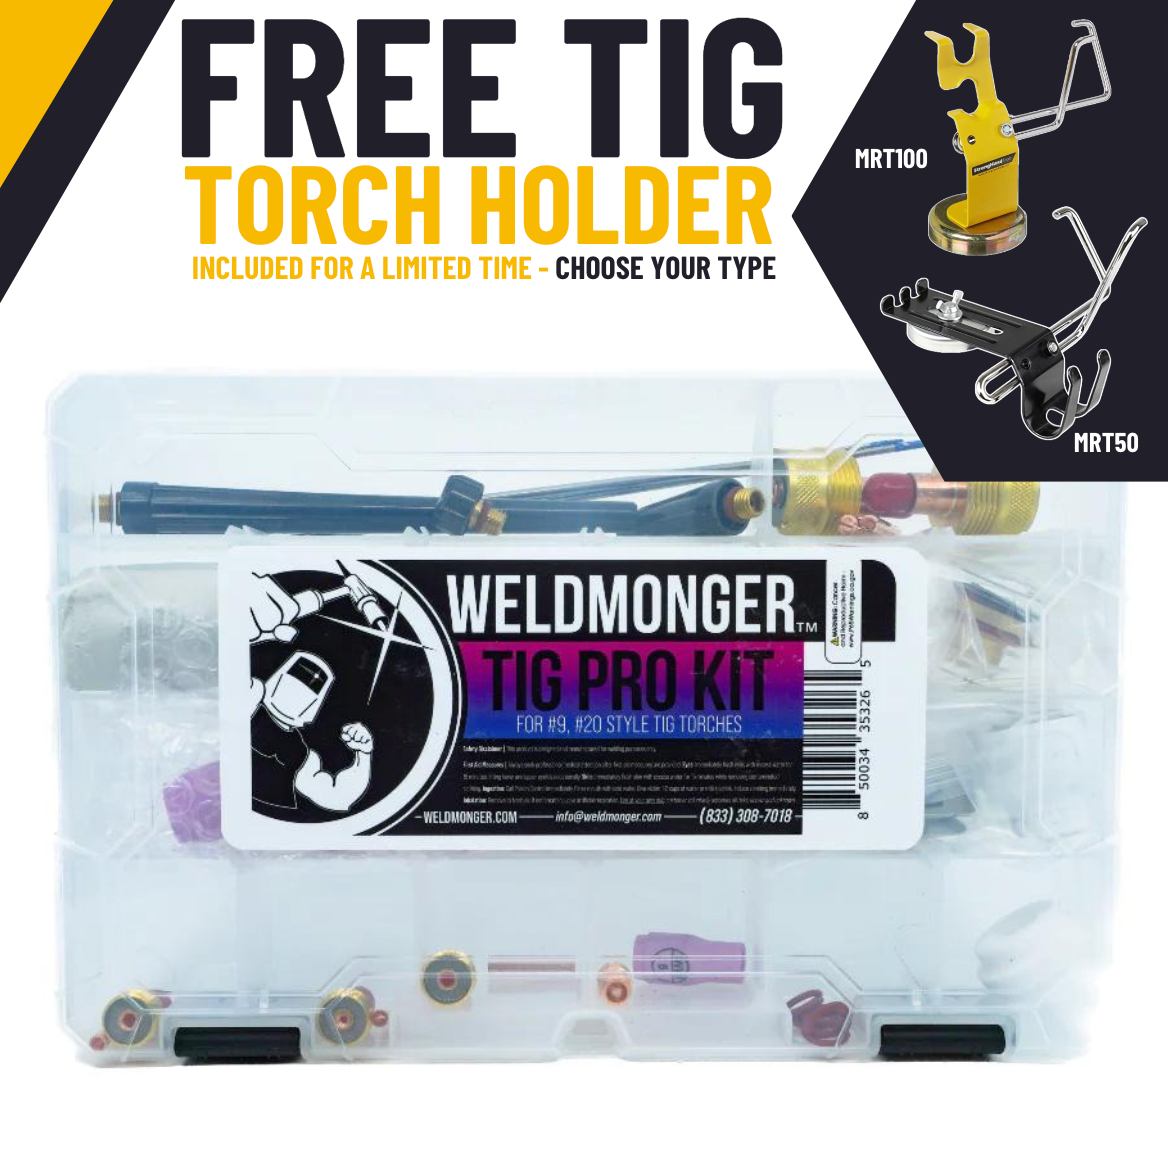 WELDMONGER® TIG PRO KIT FOR 9/20 STYLE TORCHES, Stronghand Tools Ready Rest Included For A Limited Time